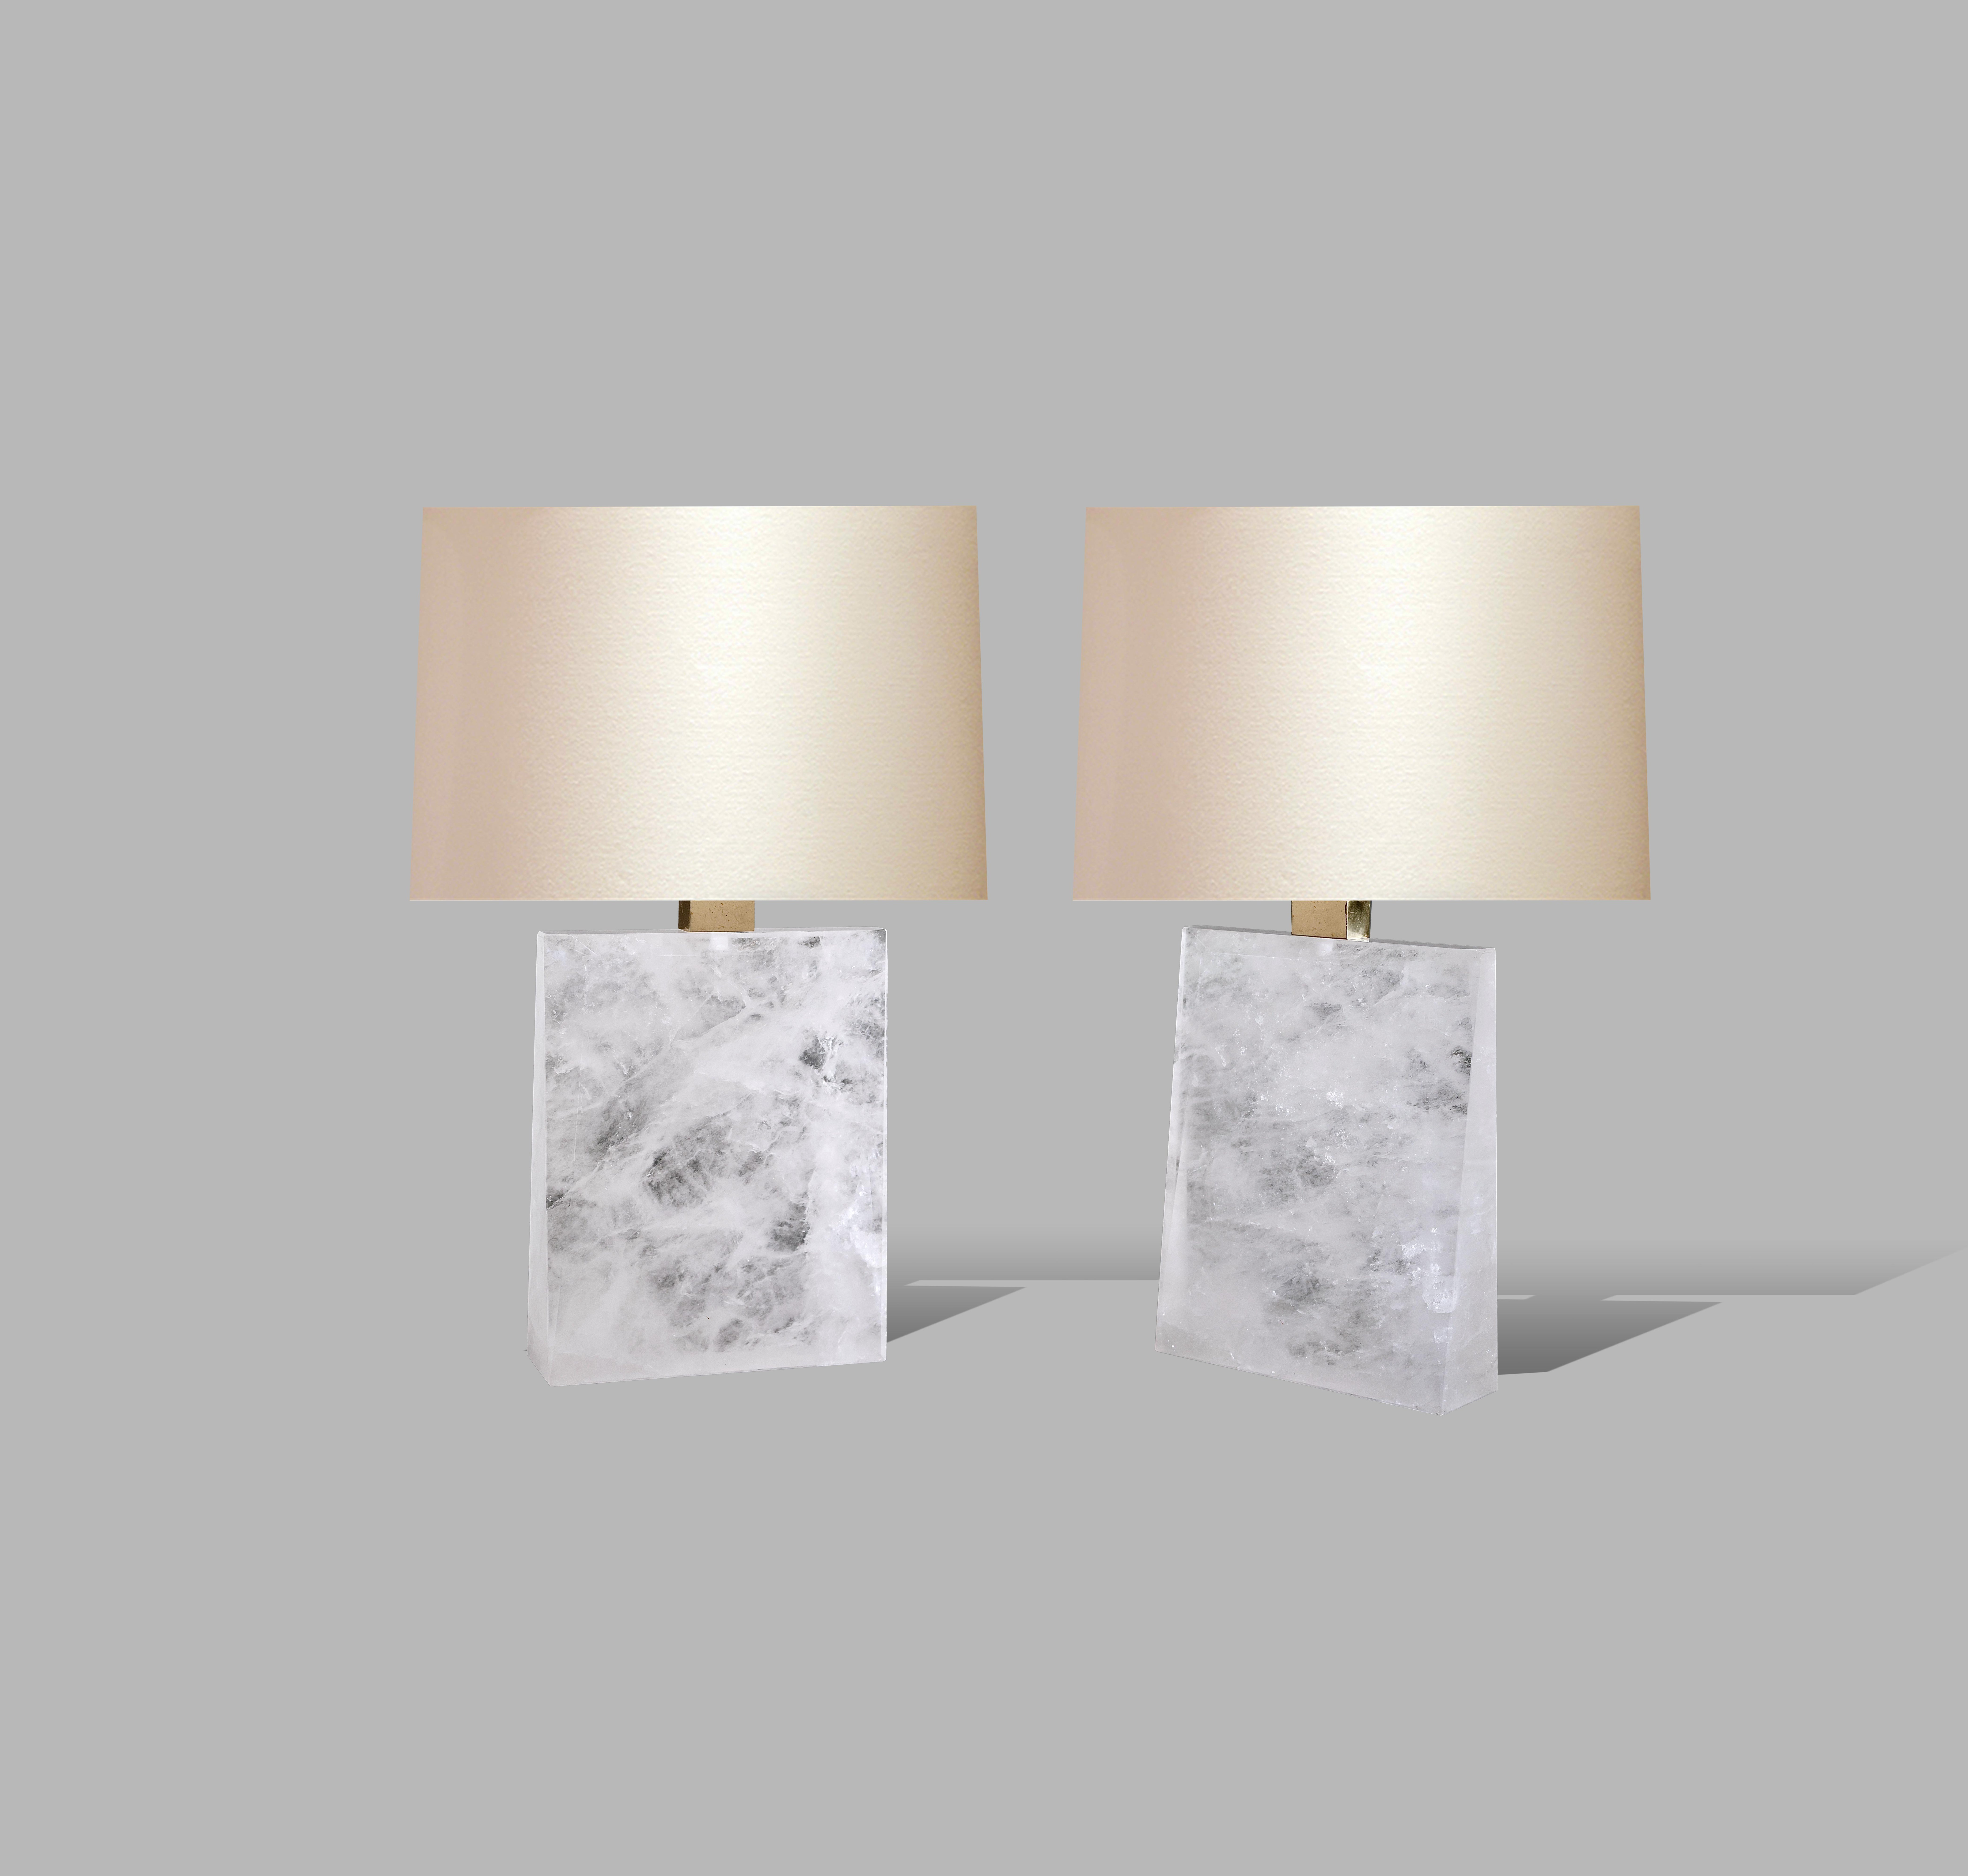 Finely carved symmetrical multifaceted rock crystal lamps with polish brass light setting. Created by Phoenix Gallery. 
To the top of rock crystal: 12